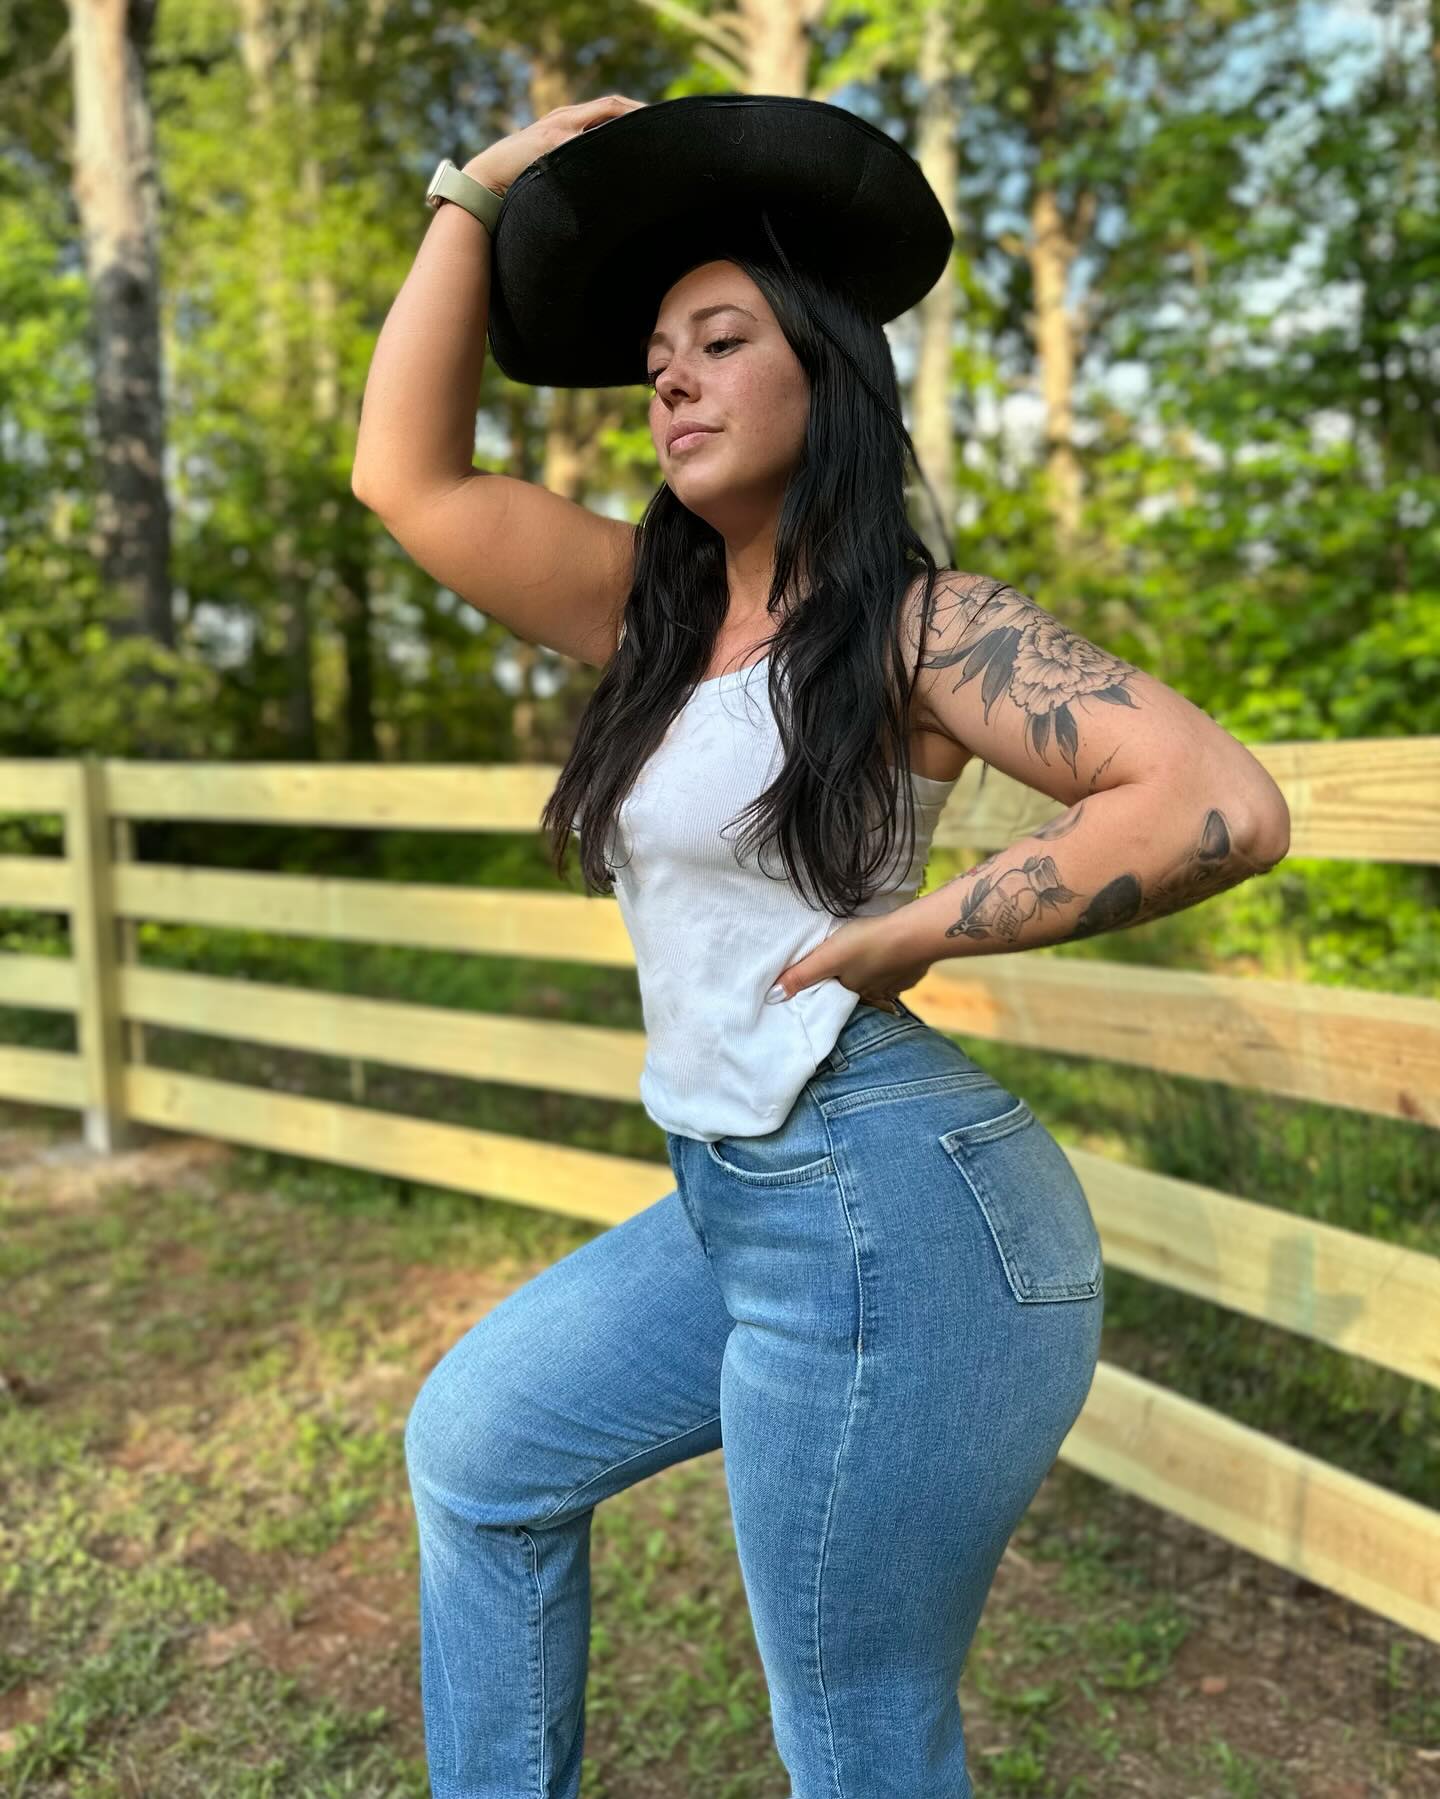 •• Happy Wednesday 🤠

@fitjeans sale starts this Sunday 05/12; sign up now for the presale using my link to get early access on Saturday 05/11. 20% off site wide + code miranda will be available this weekend for an additional 10% off!